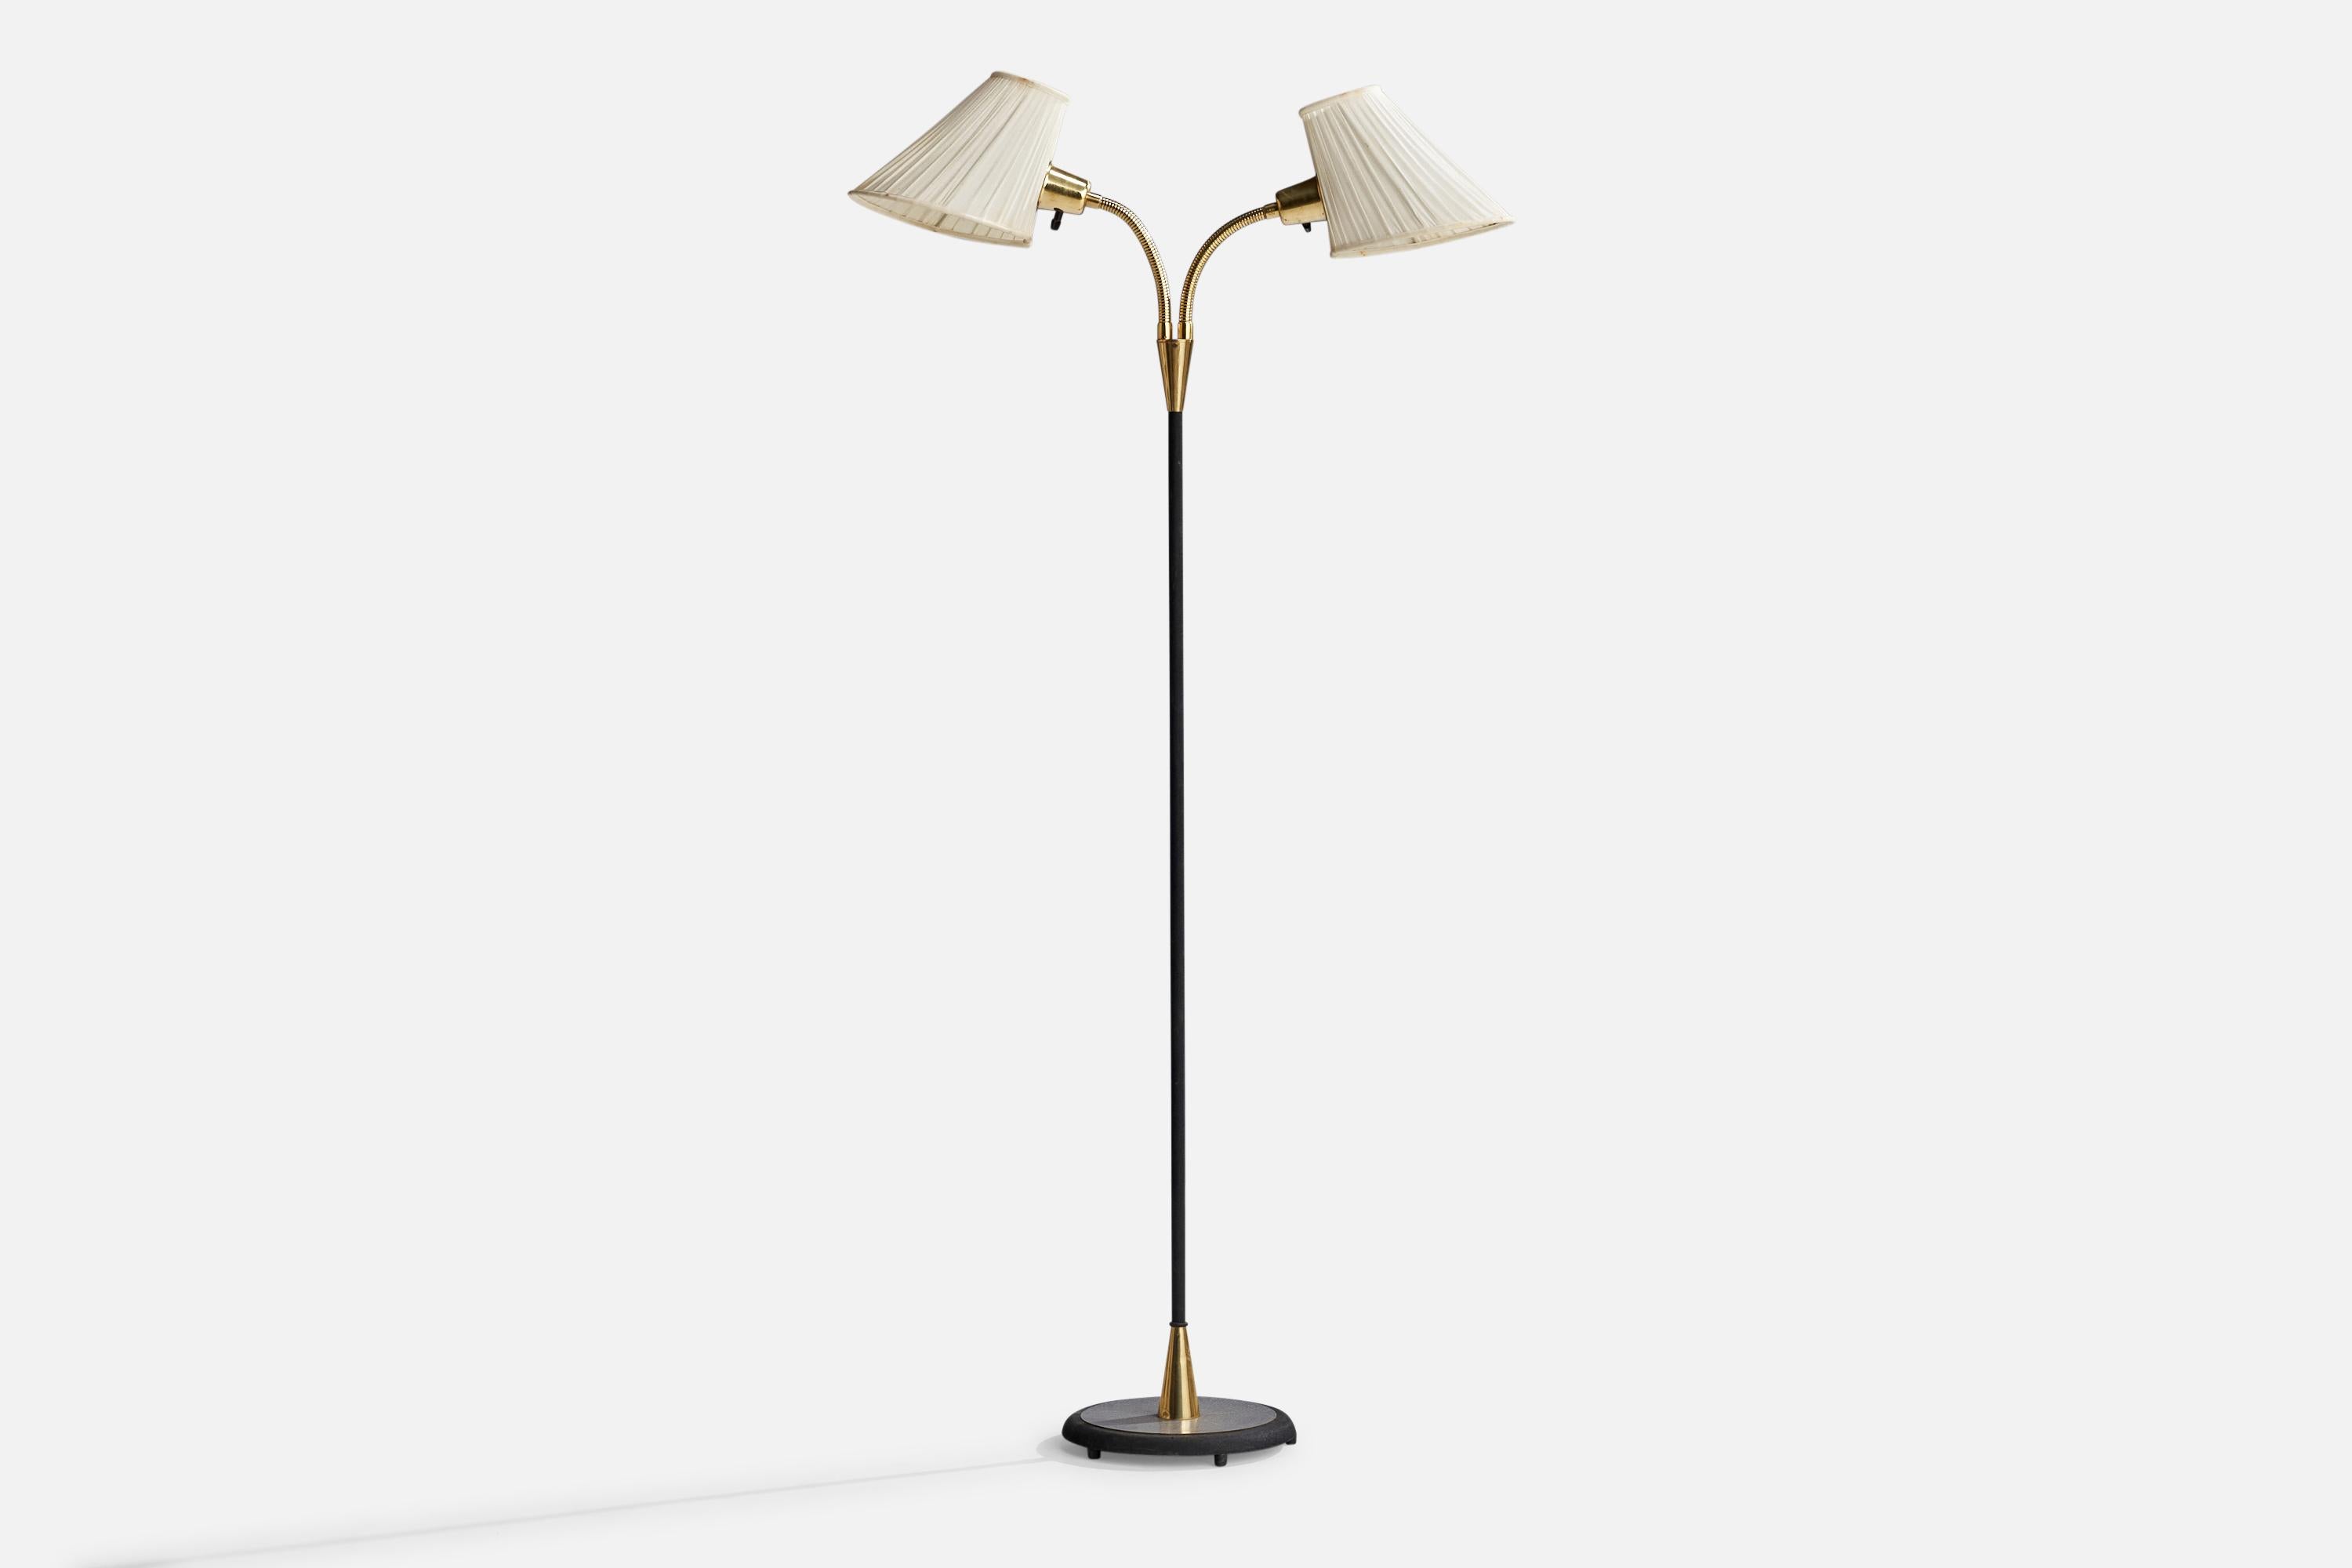 A brass, black-lacquered metal and off-white fabric floor lamp designed and produced by Falkenbergs Belysning, Sweden, 1950s.

Dimensions variable.

Overall Dimensions (inches): 57”  H x 10.25” W x 15” D
Stated dimensions include shade.
Bulb